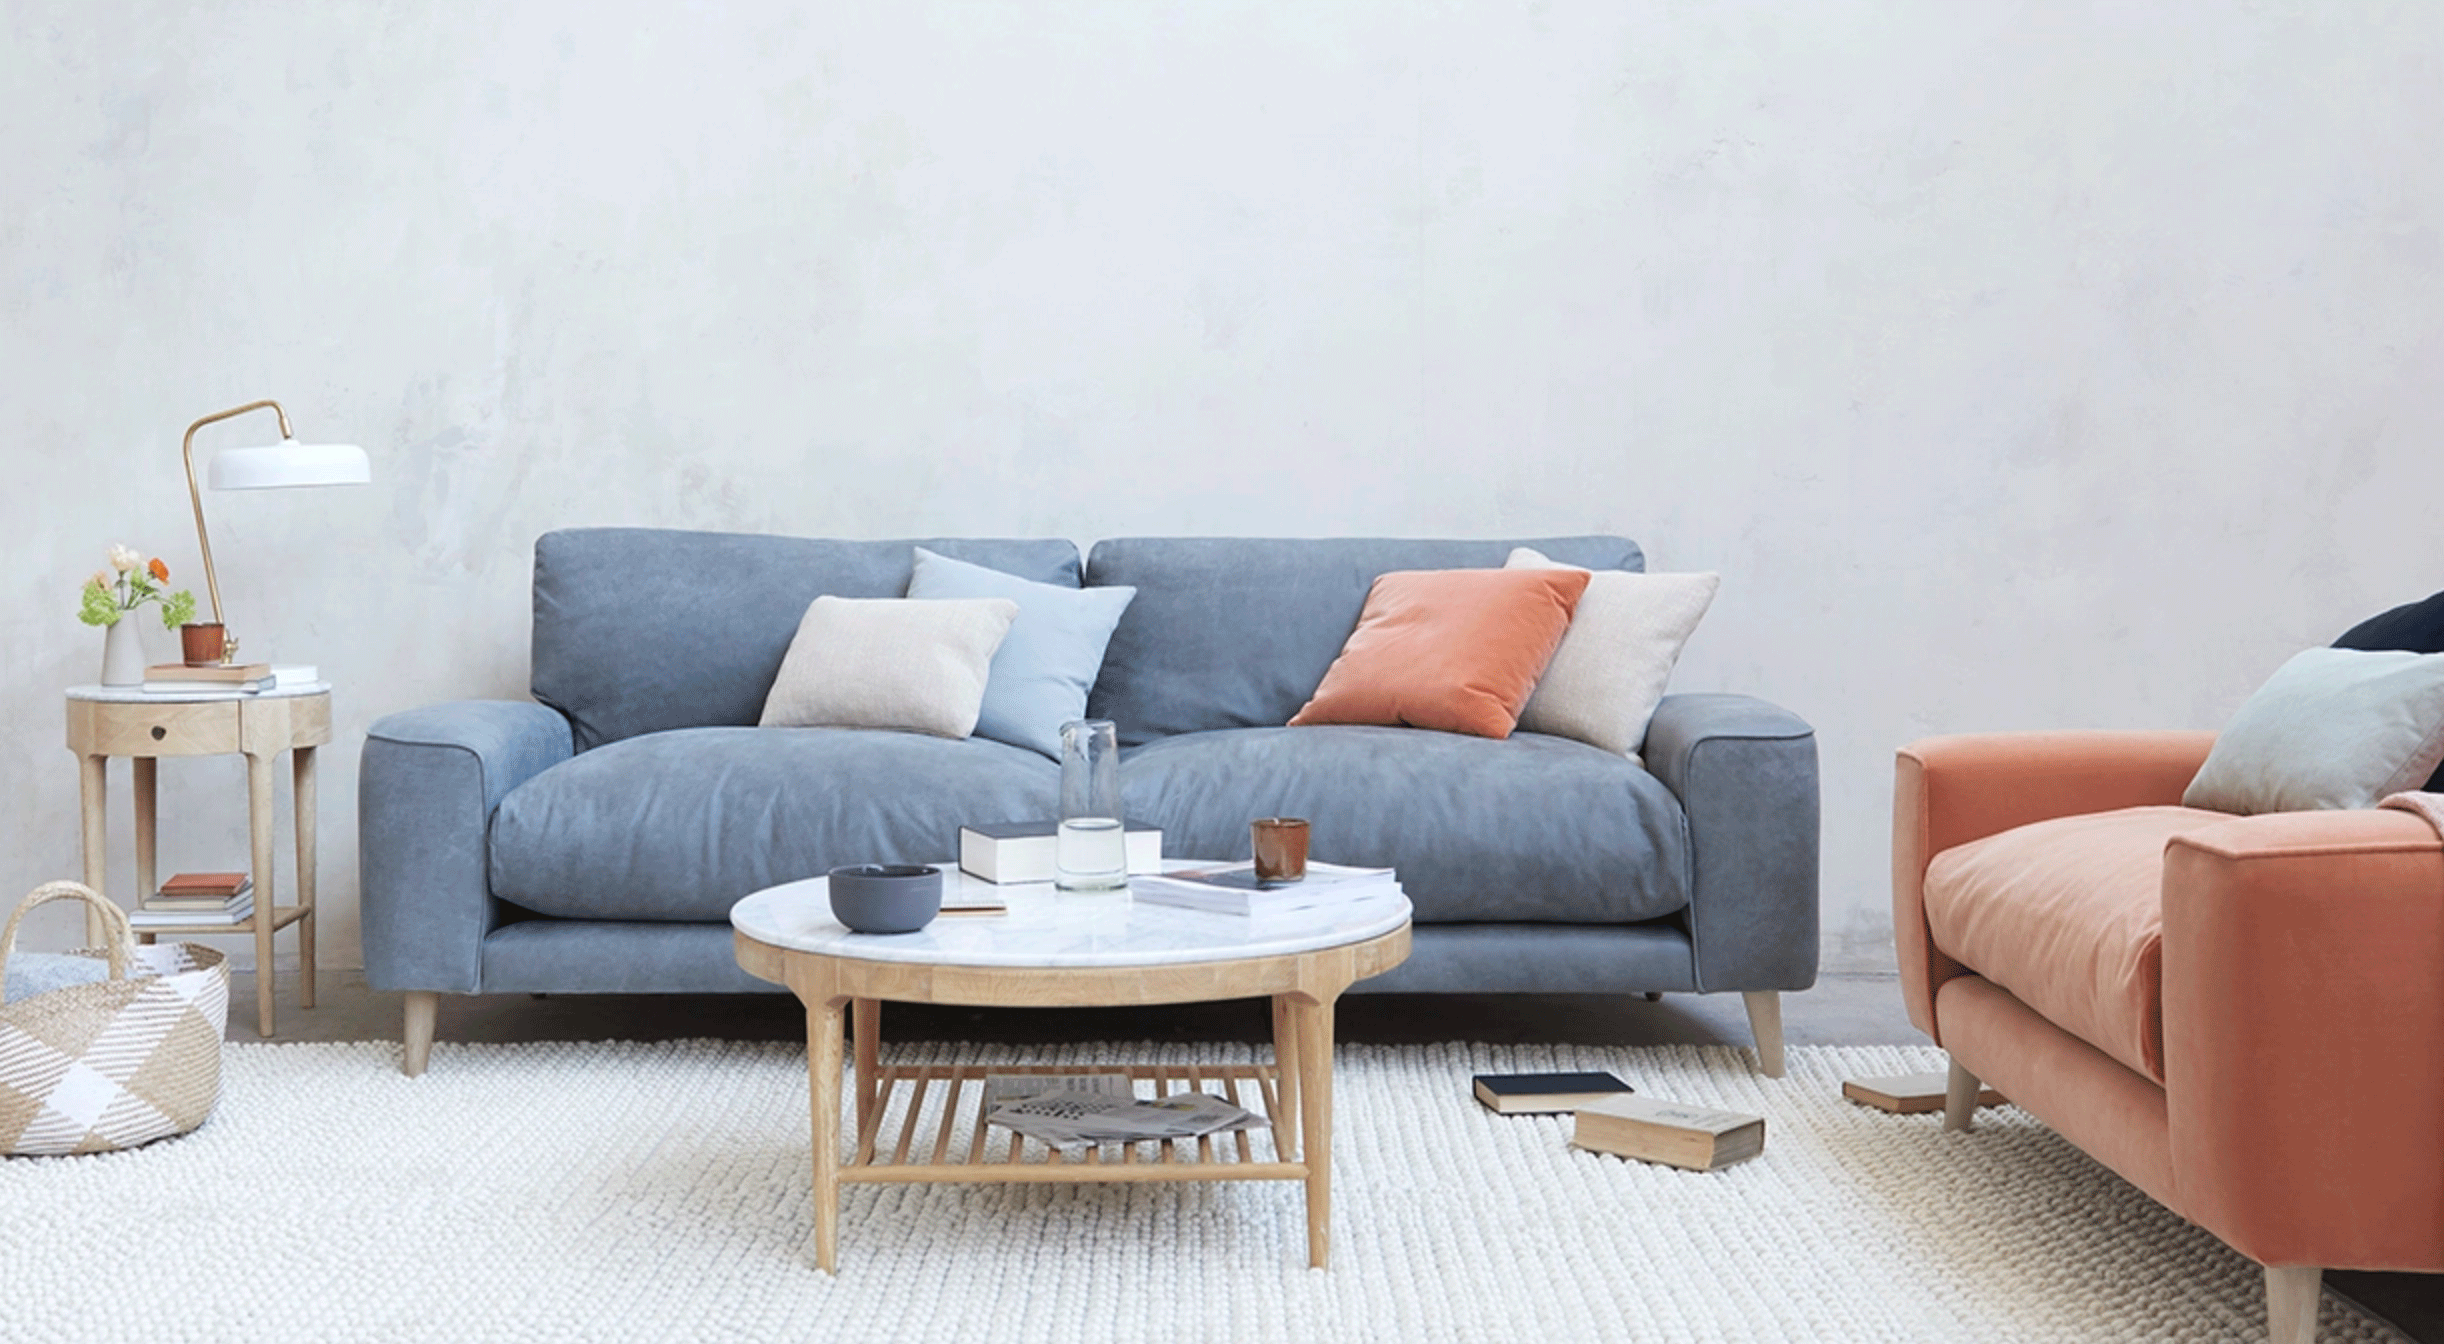 Best sofa brands: loaf sofa in blue with scatter cushions